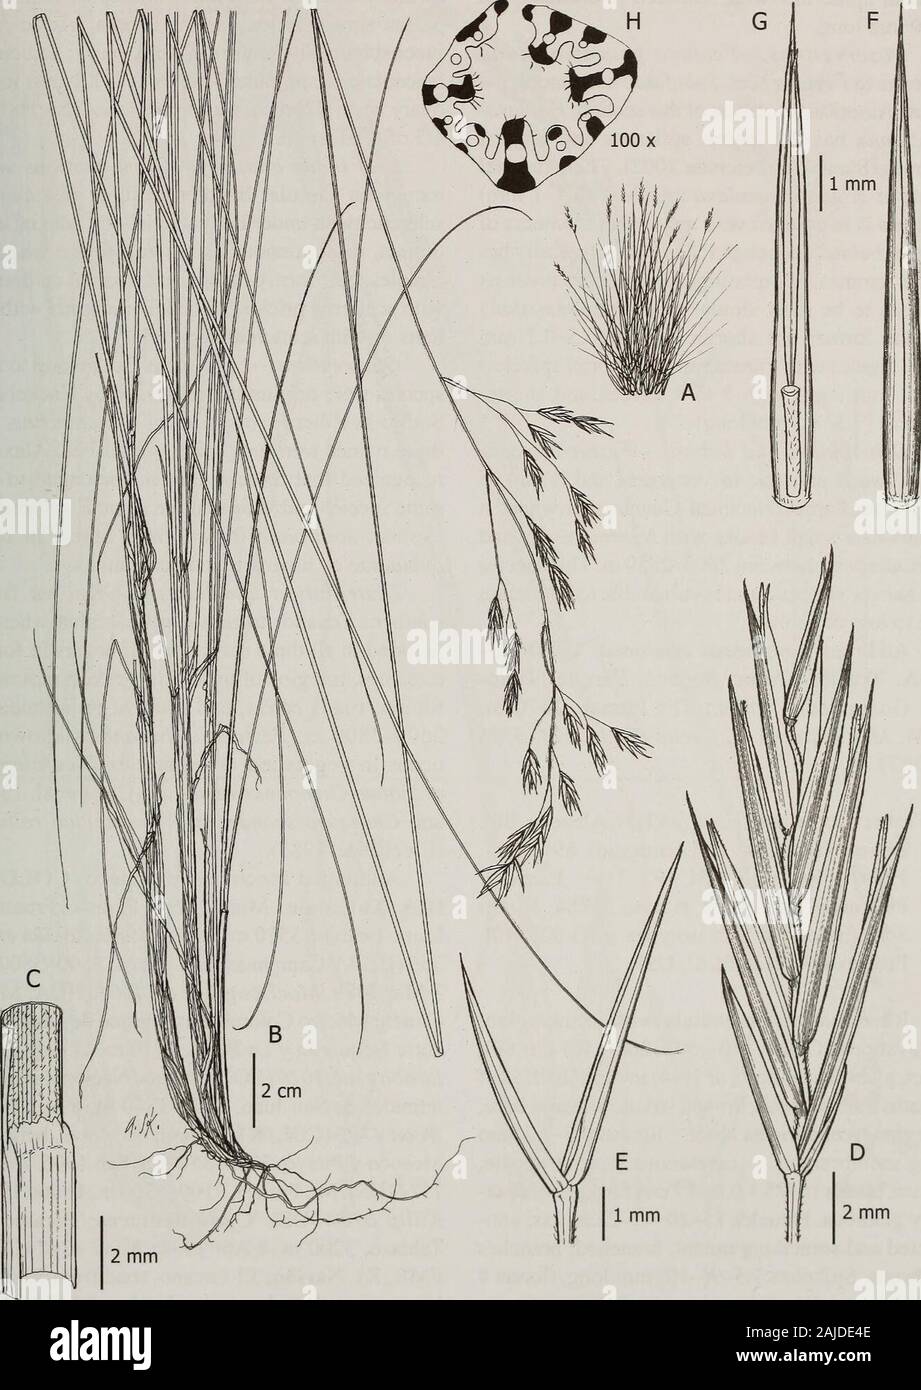 Contributions from the United States National Herbarium . reen, abaxially glabrous.Panicles 15-20 x 2-5 cm, flexuous, pendant, elon- gate, branched; branches finely scabrous. Spikelets13-15 mm long, narrowly lanceolate, florets 5-7;rachilla pilose; glumes 3.7-7 mm long, narrowlylanceolate, purplish, membranous to coriaceous,sparsely scabrous, apex acute; lower glumes 3.7-4.7 mm long, 1 -nerved; upper glumes 5-7 mm long,3-nerved; lemmas 9.5-10 mm long, membranousto coriaceous, lanceolate, 5-nerved, purplish, papil-lose, apex entire, mucronate or shortly awned, theawn 0.5-1 mm long; callus spars Stock Photo